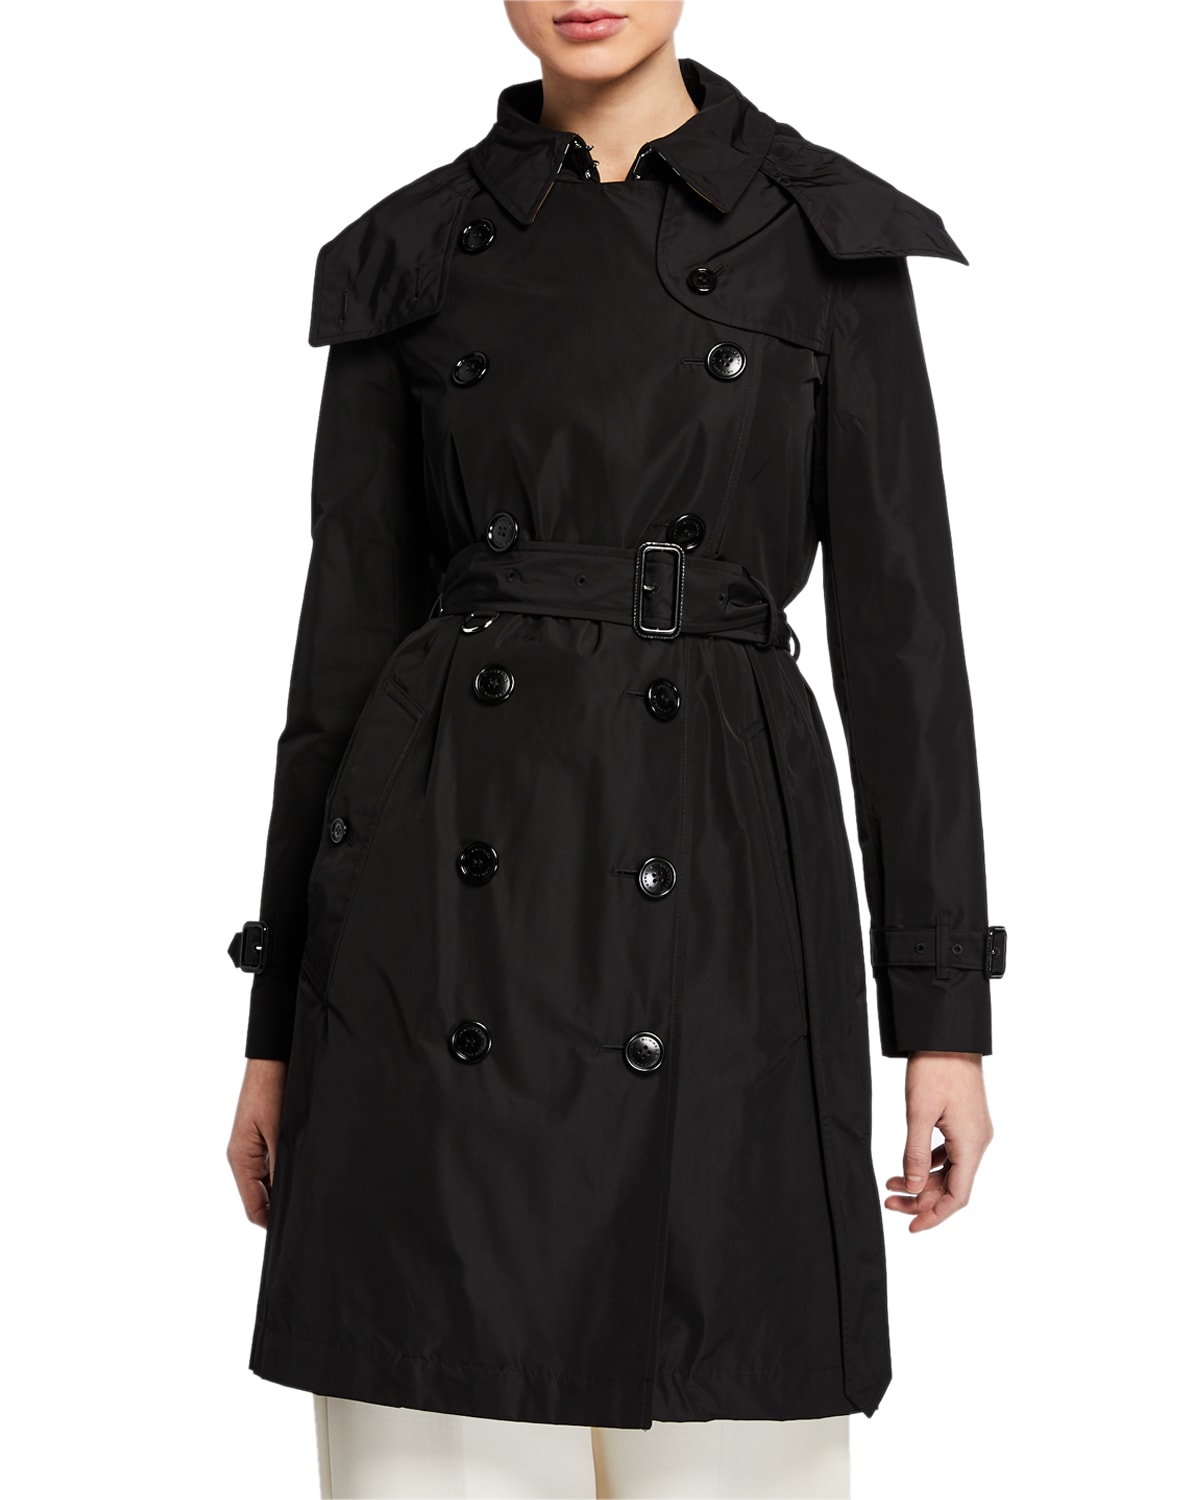 Kensington Double-Breasted Trench Coat with Detachable Hood